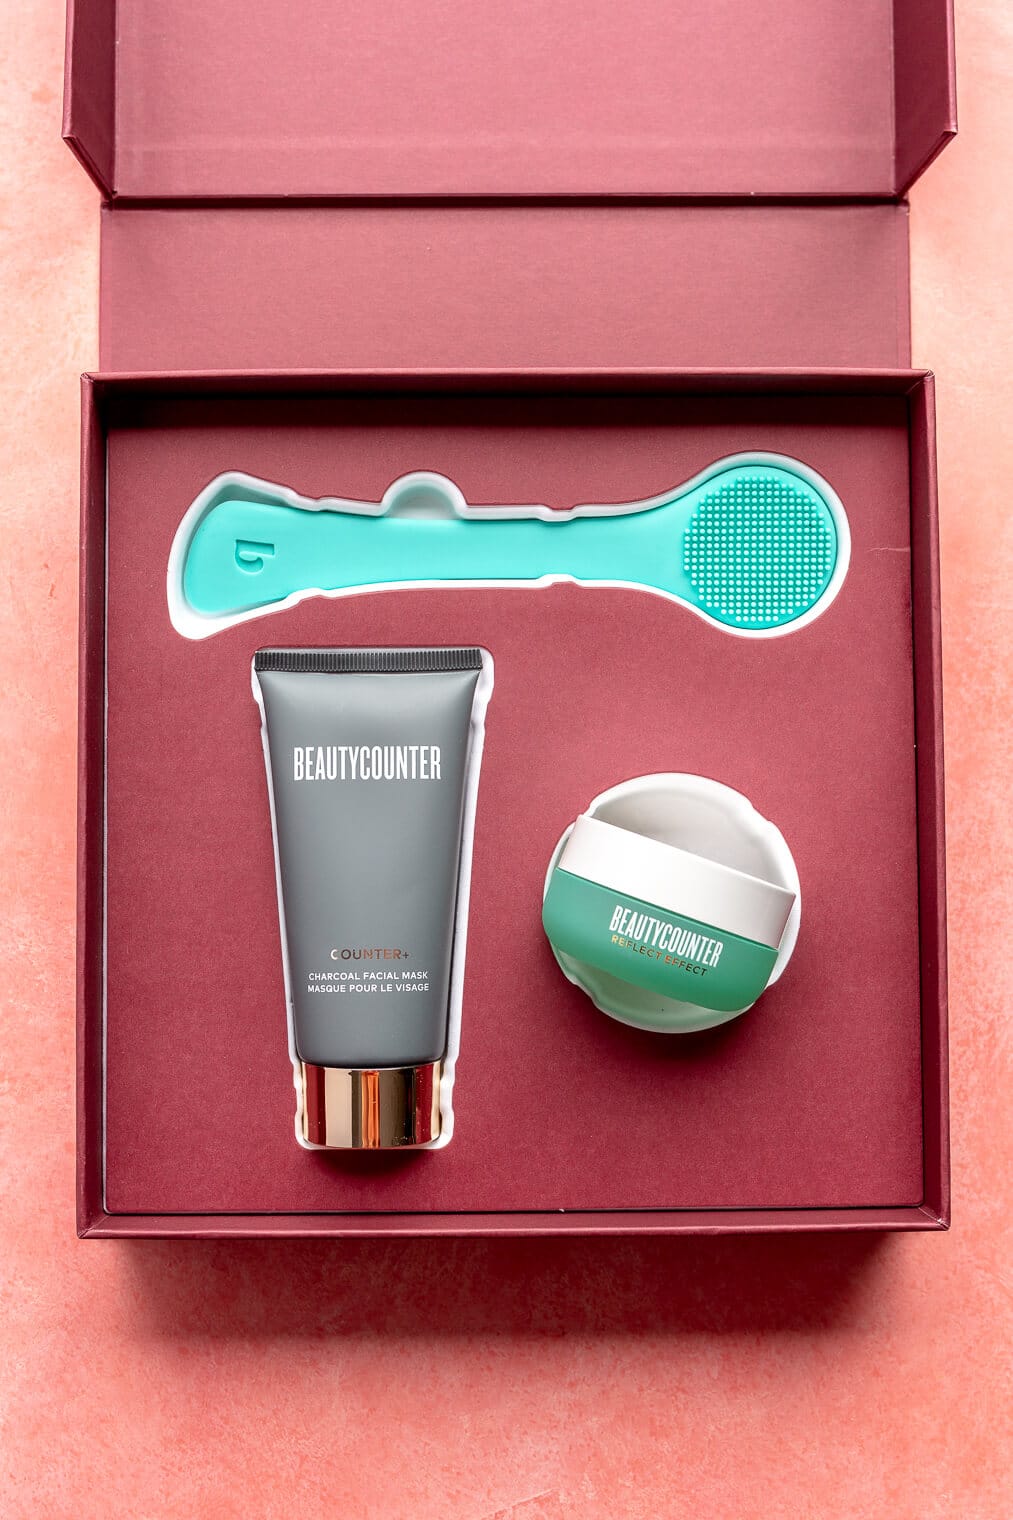 A turquoise silicone skin care tool is nestled in the top of the box. Below it are a charcoal tube and a small, round, turquoise container containing face masks. All are sitting in a maroon box on a pink blush surface.